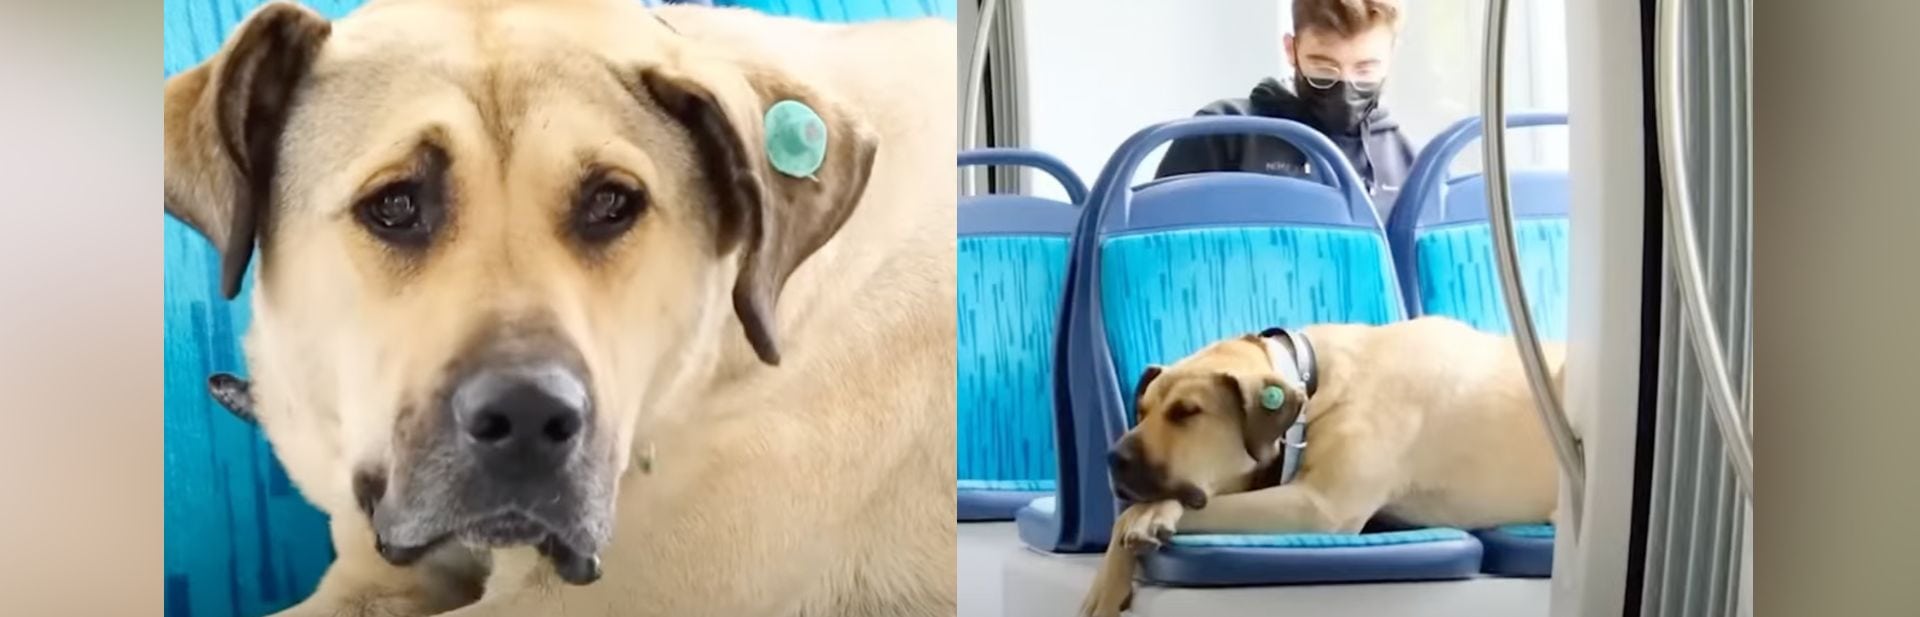 This Lonely Dog With Free Subway Pass is Everyone’s Favorite Co-commuter